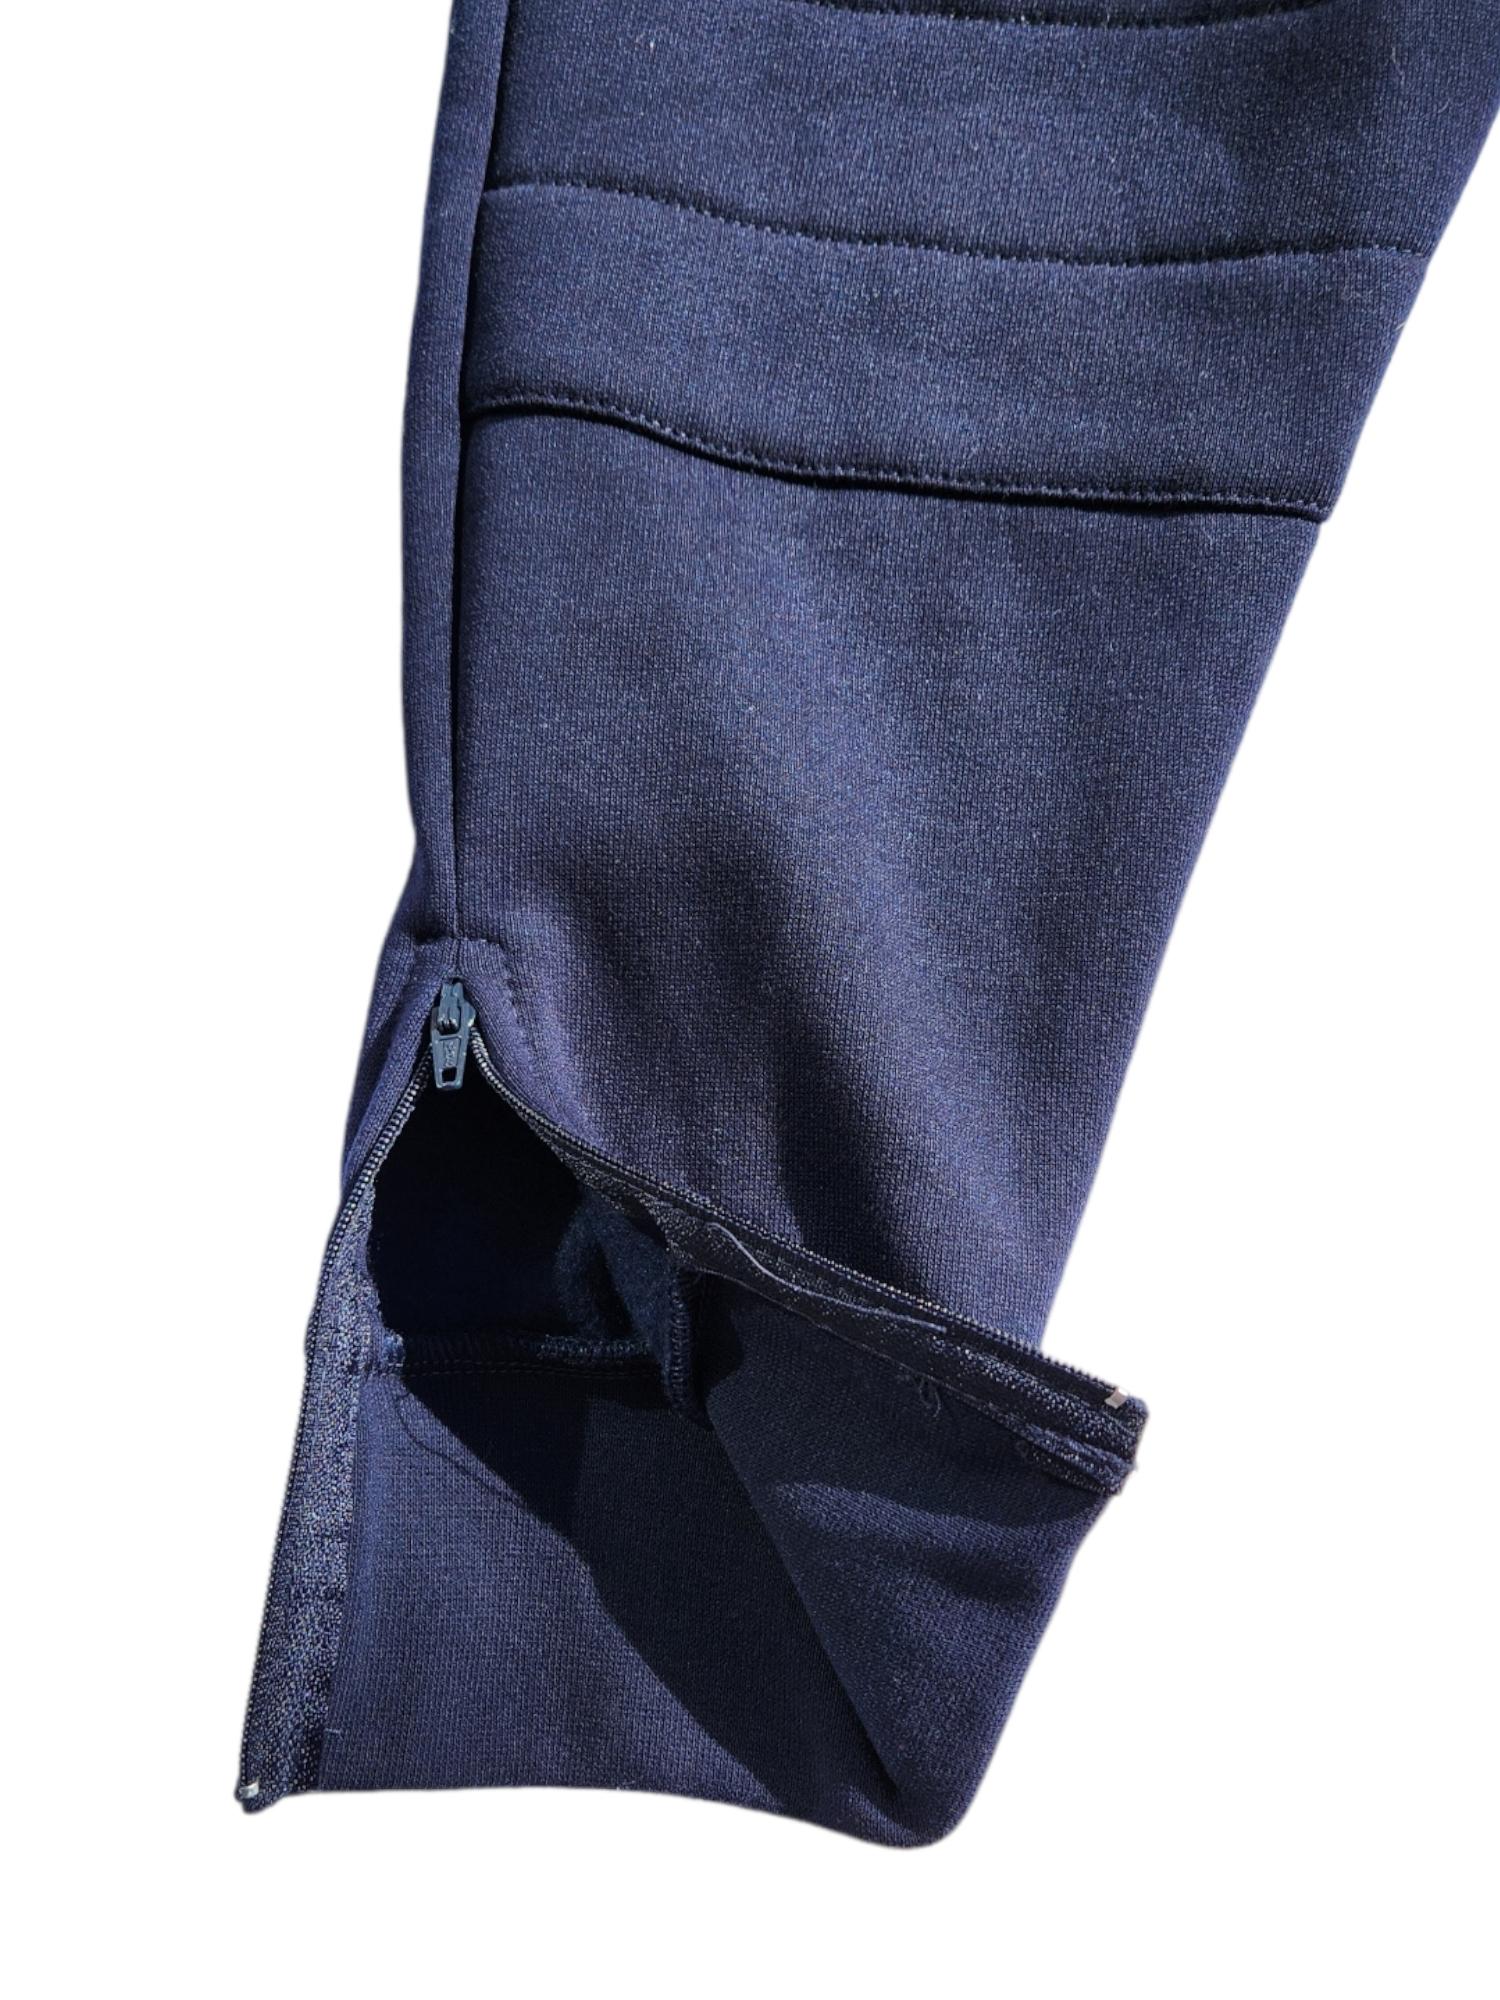 Close up image of navy blue school cotton fleece track pants with zip open at the ankle portion 